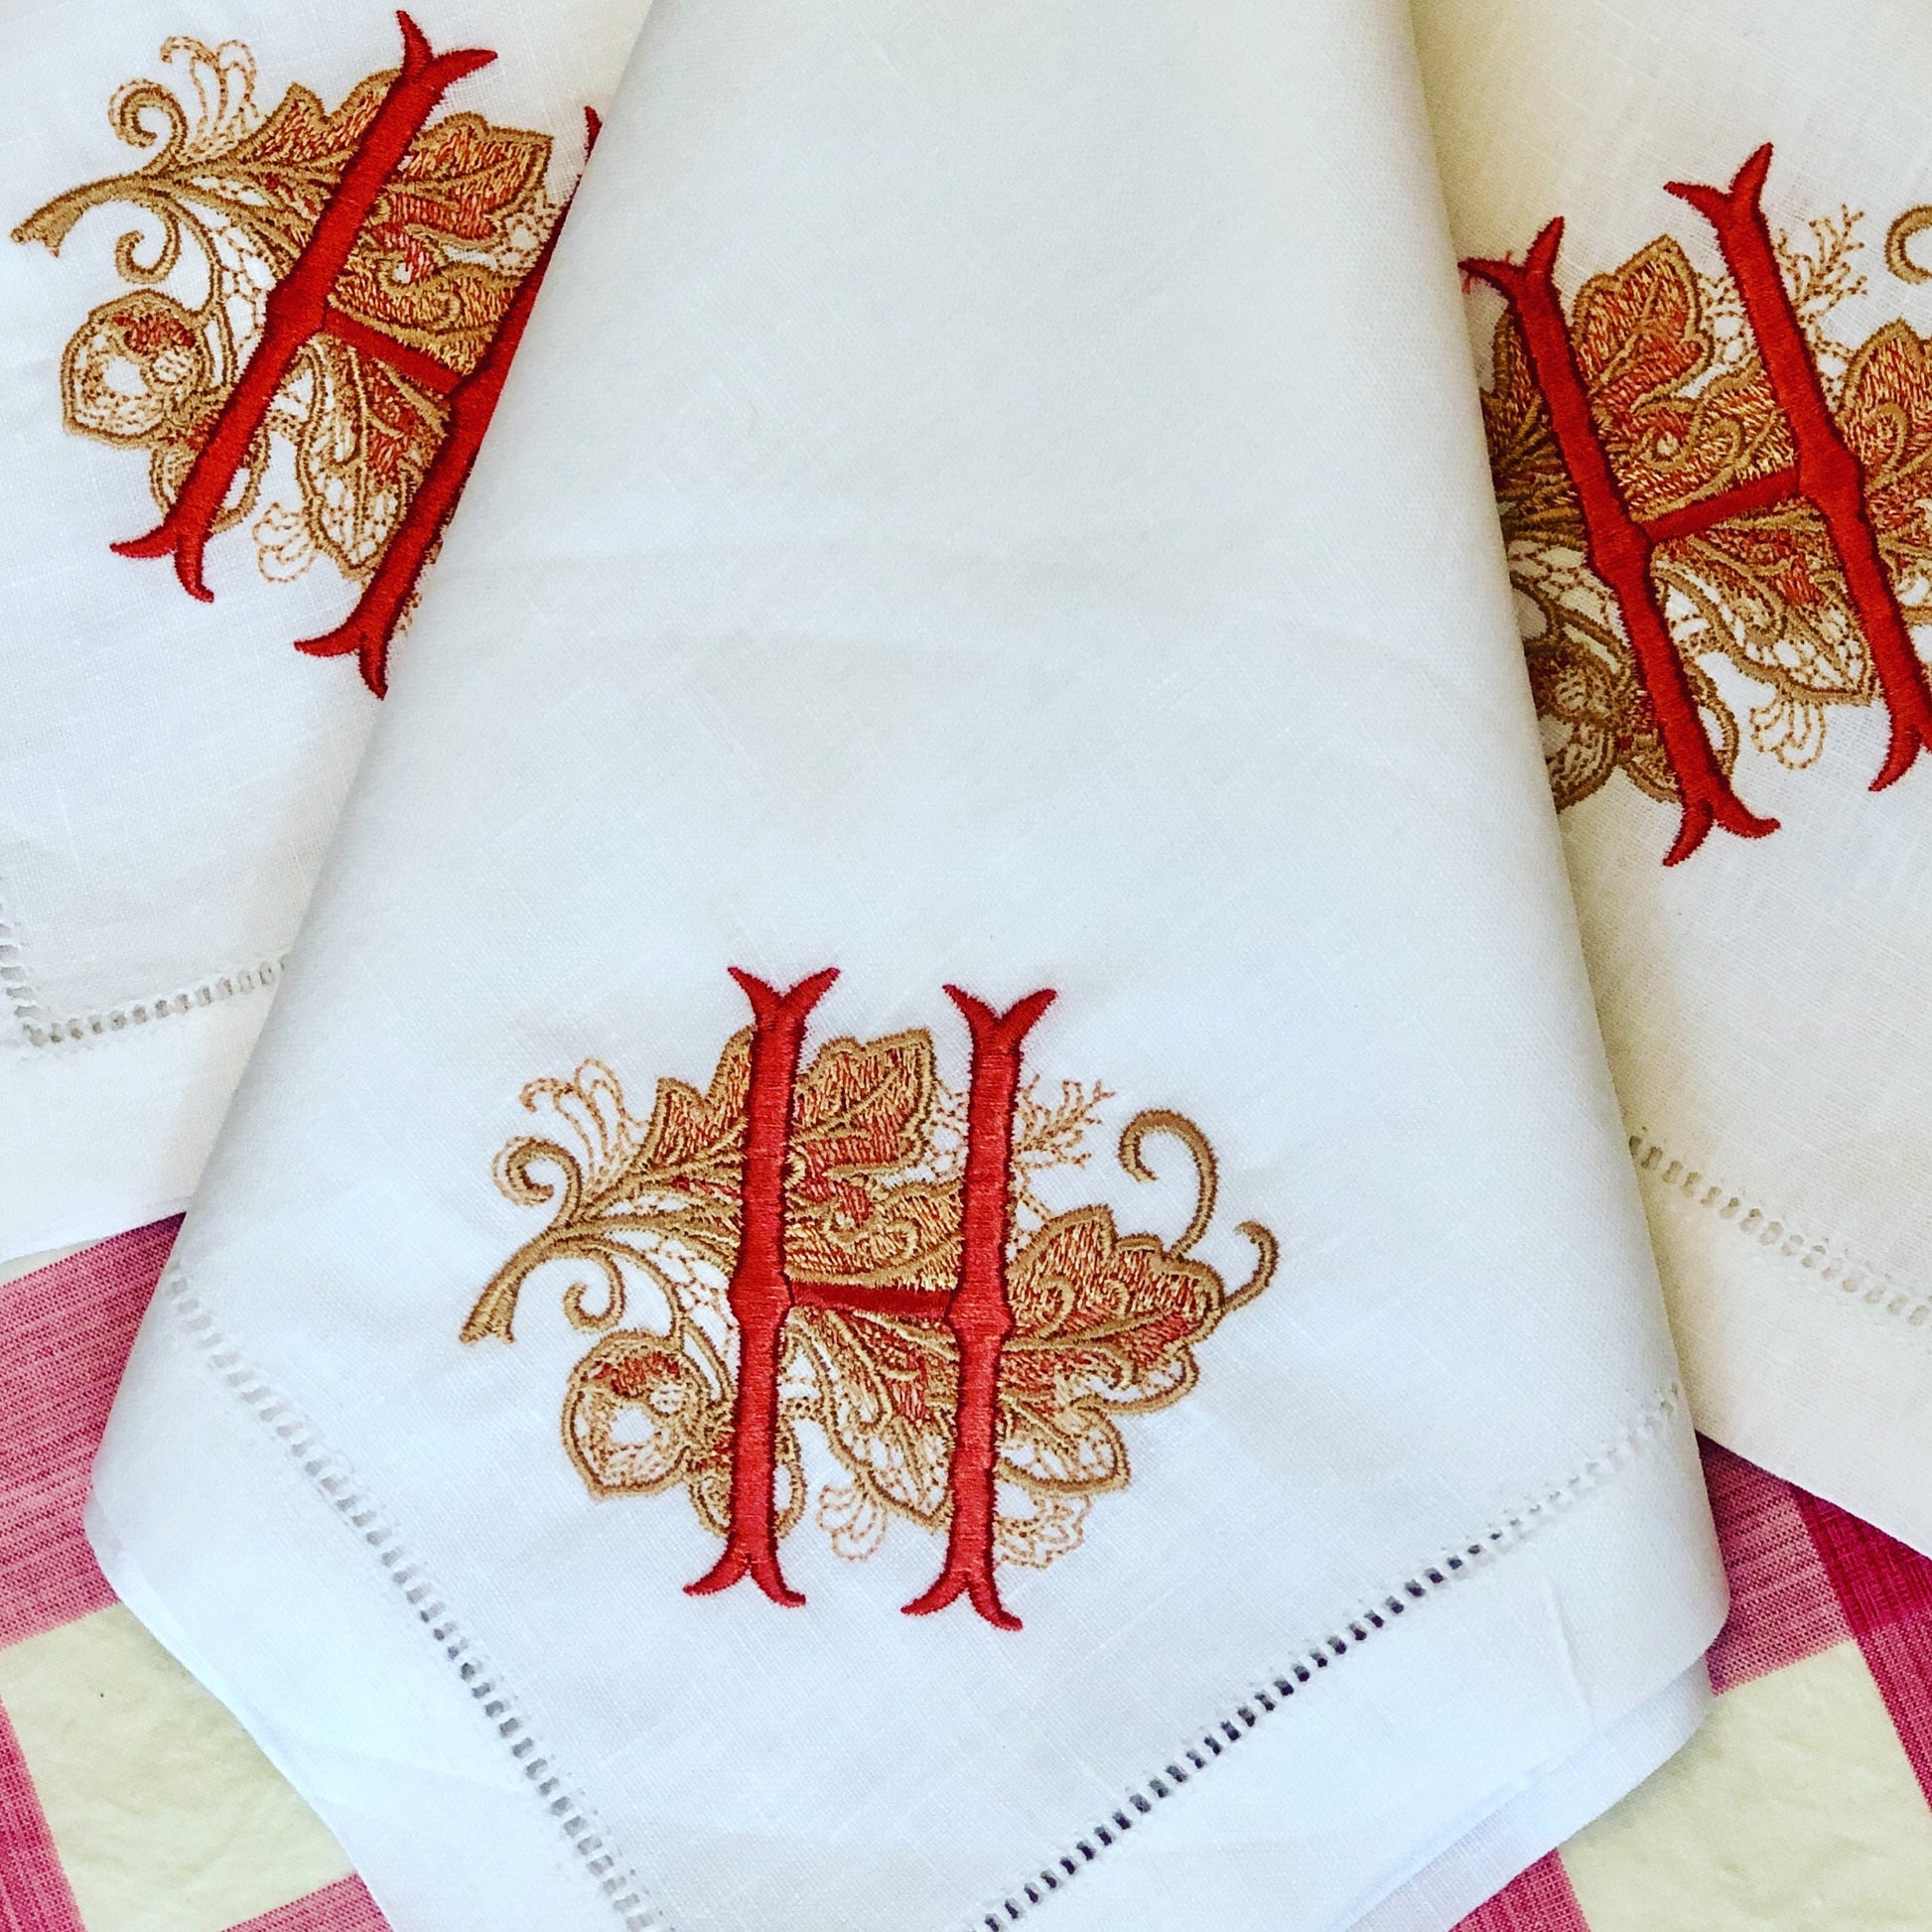 Genuine Linen Napkins - Set of 12 Cloth Napkins with Hemstitch Detail -  Hand Crafted Pure Luxury Linen Reusable Lunch Dinner Napkin - Fall Summer